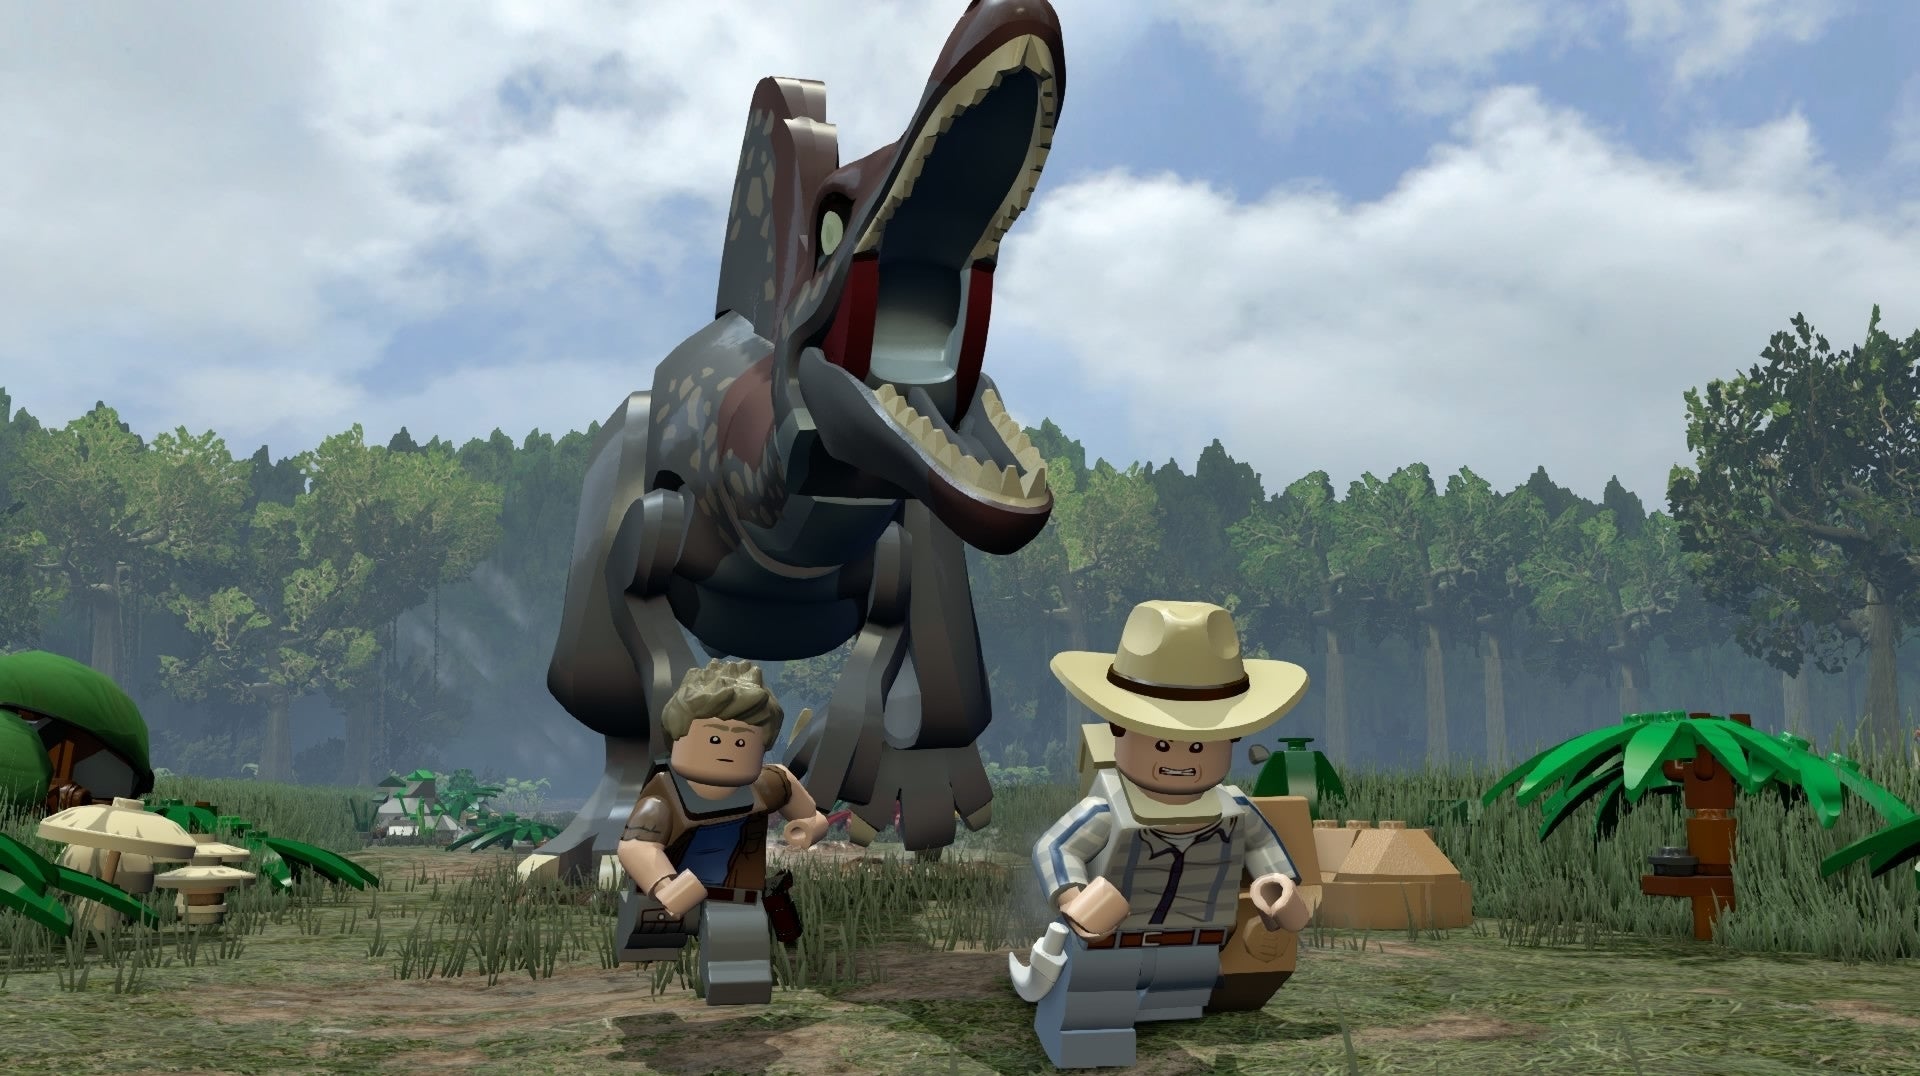 Image for Lego Jurassic World is coming to Switch this September